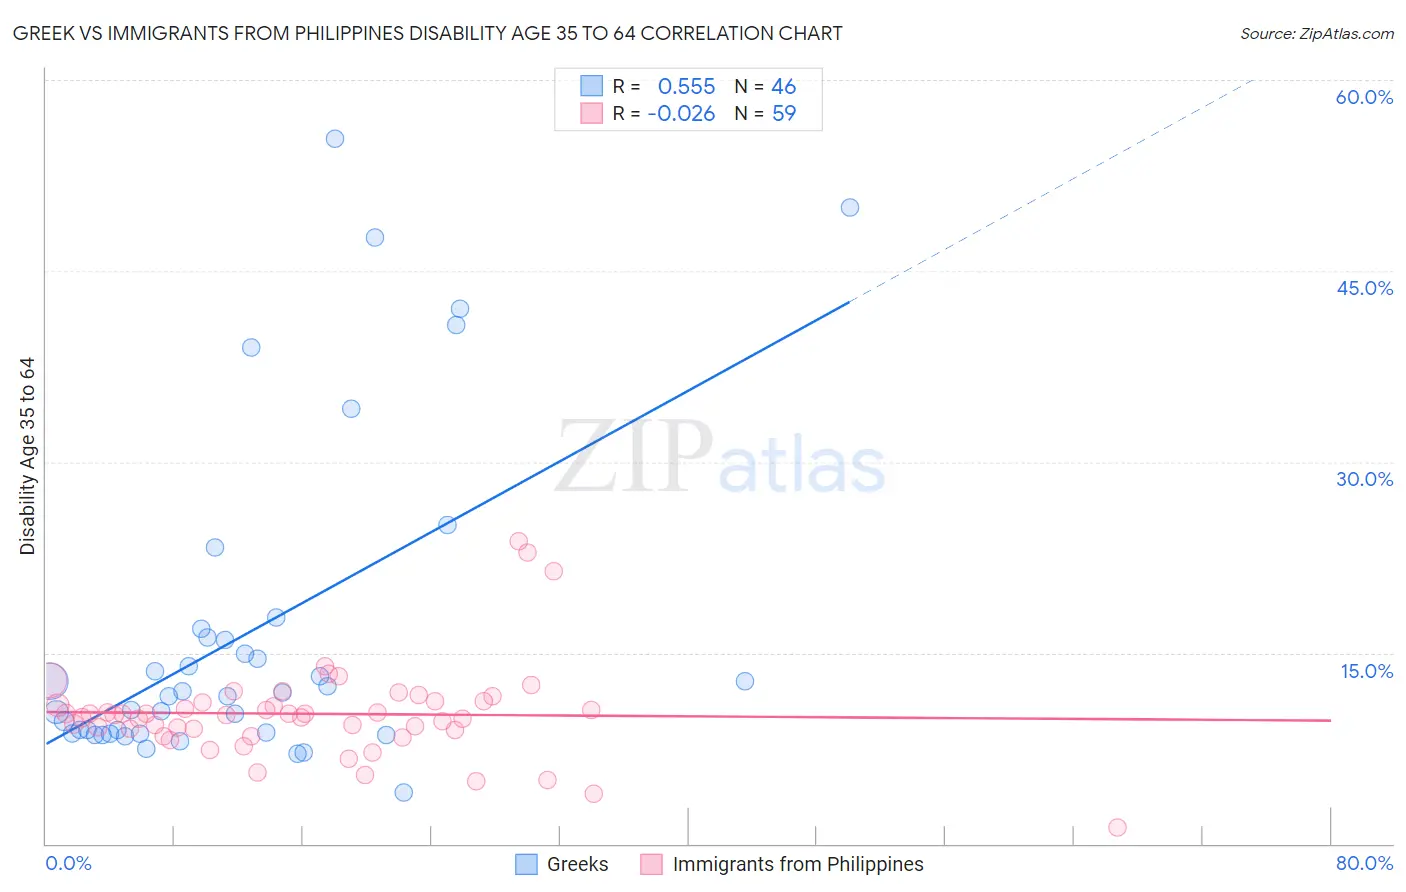 Greek vs Immigrants from Philippines Disability Age 35 to 64